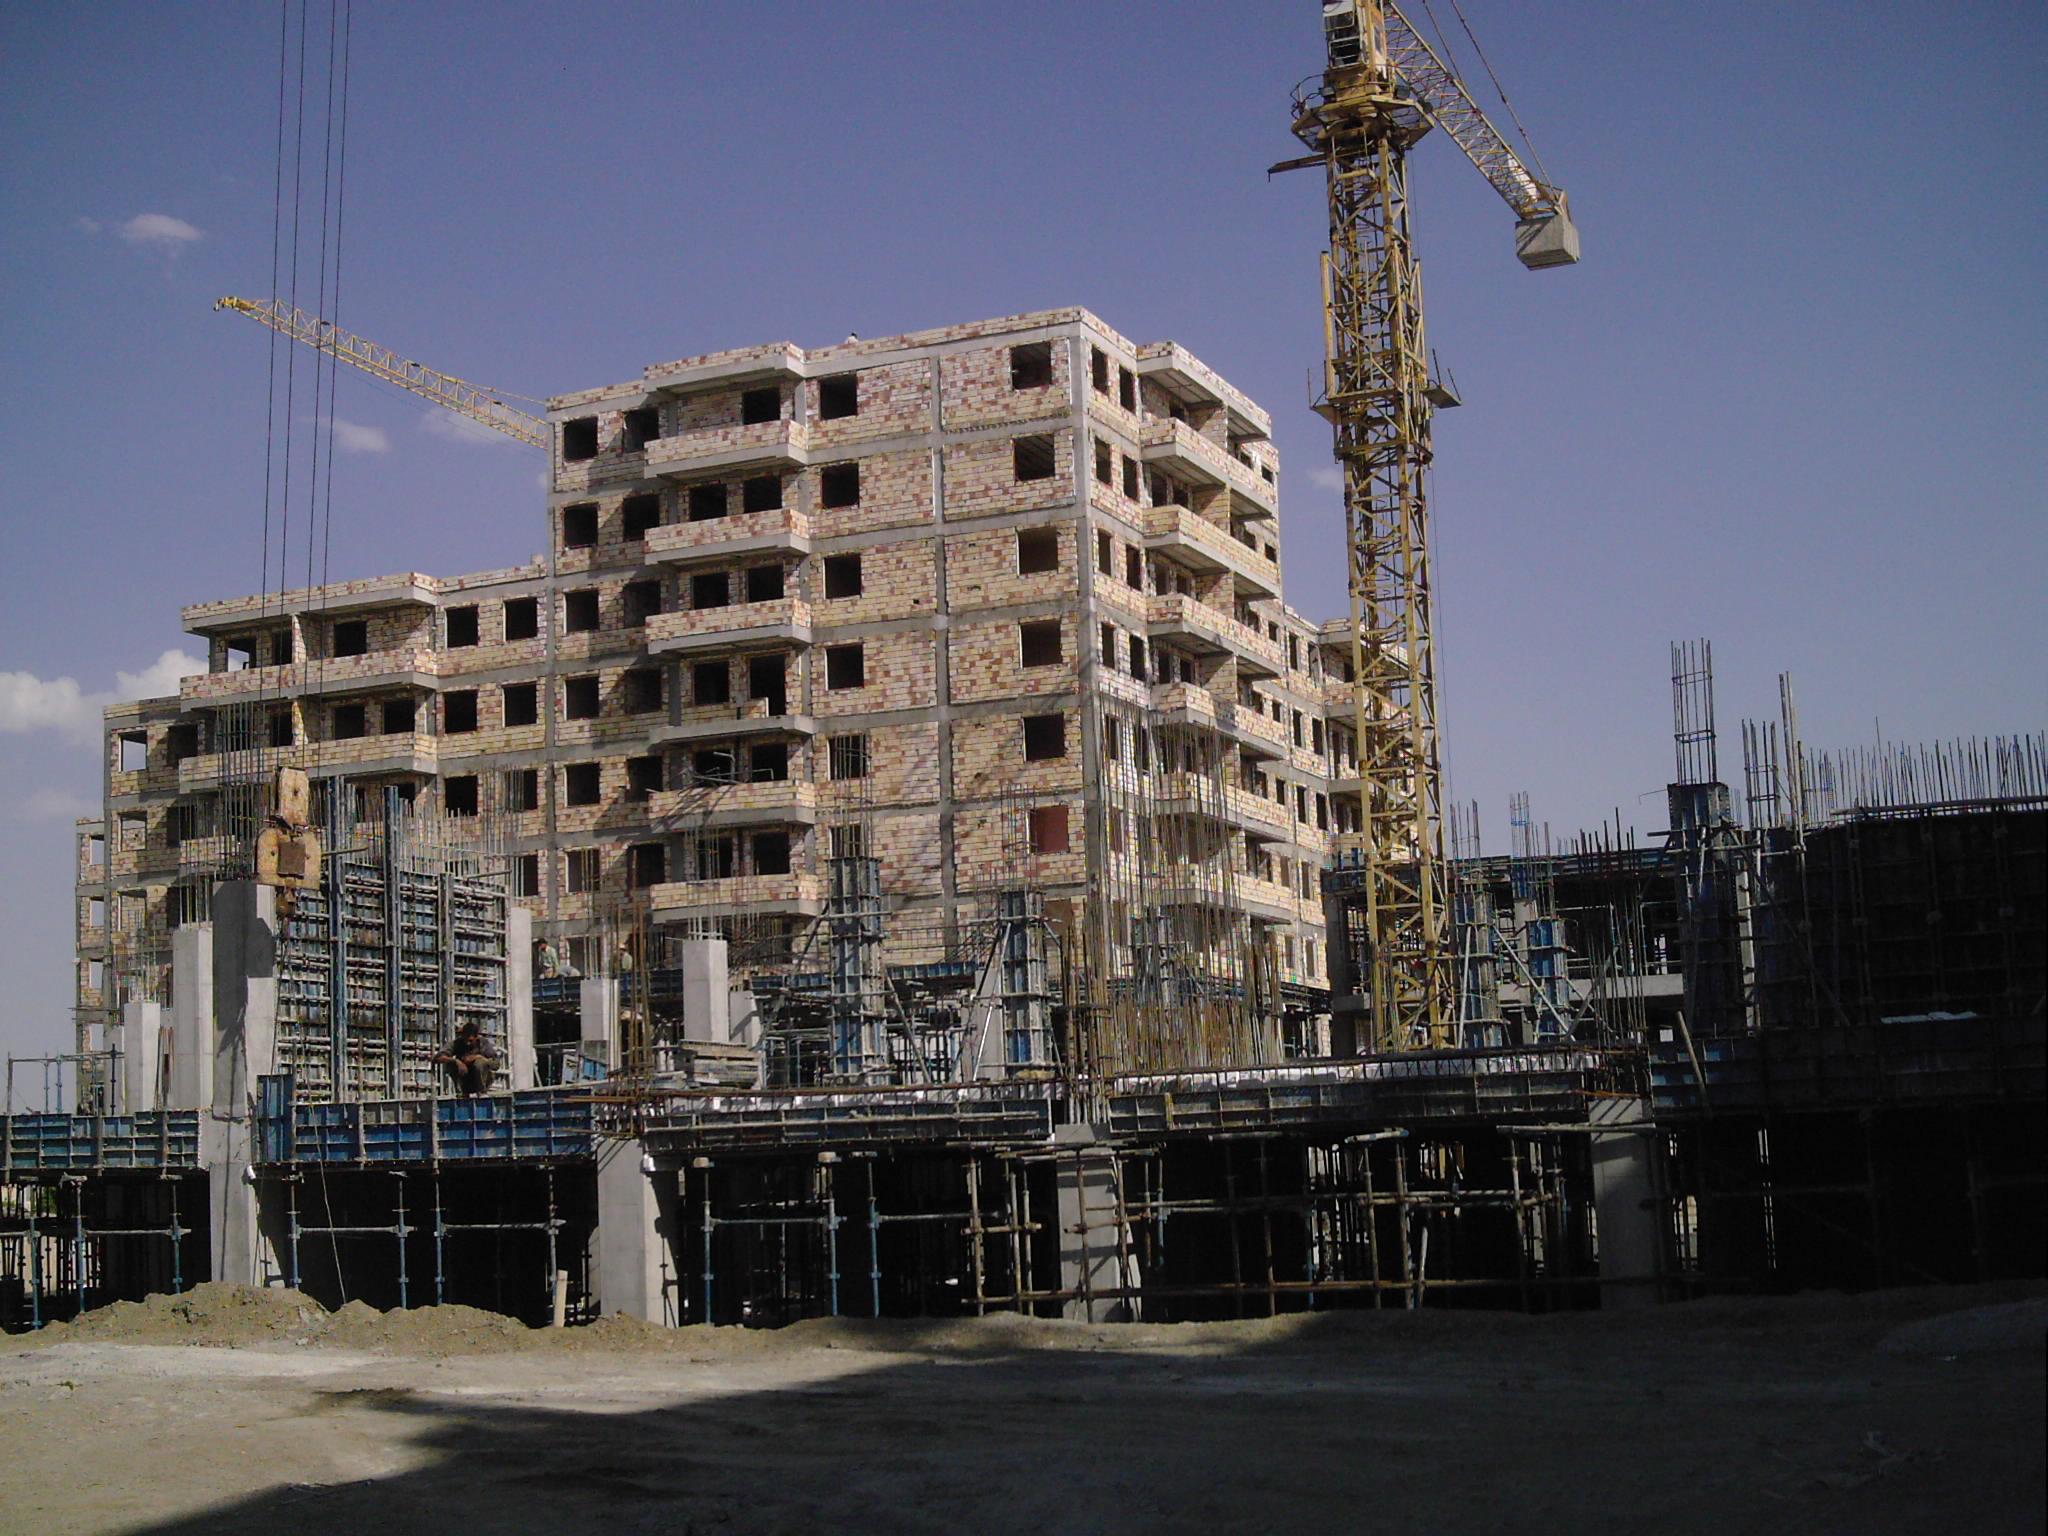 Implementation of the concrete skeleton of Pars Mashhad project